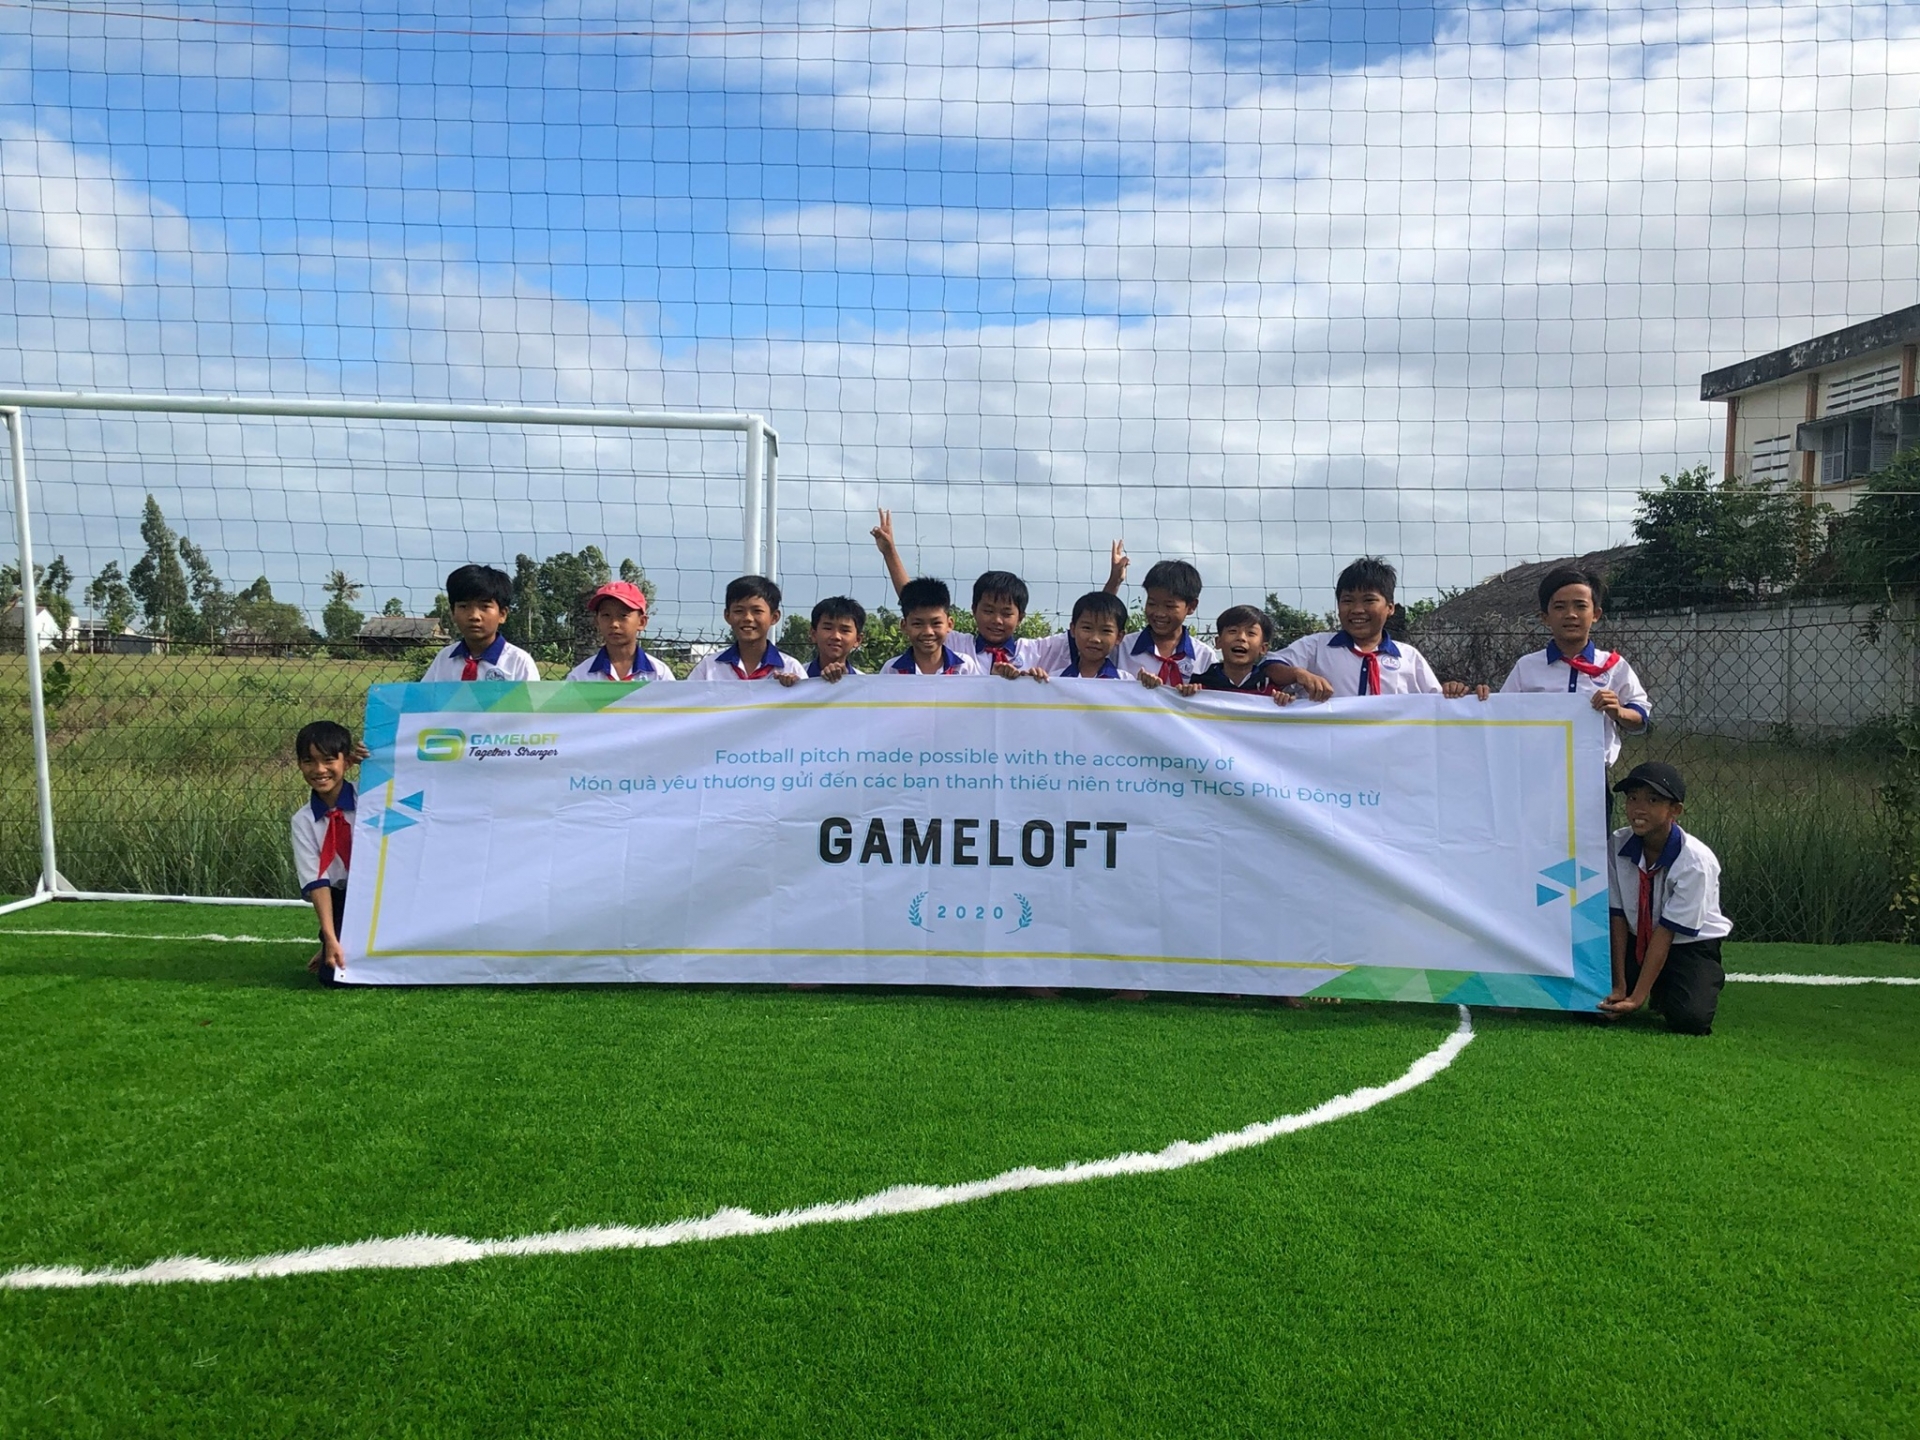 New football field opened for children in Tien Giang's district